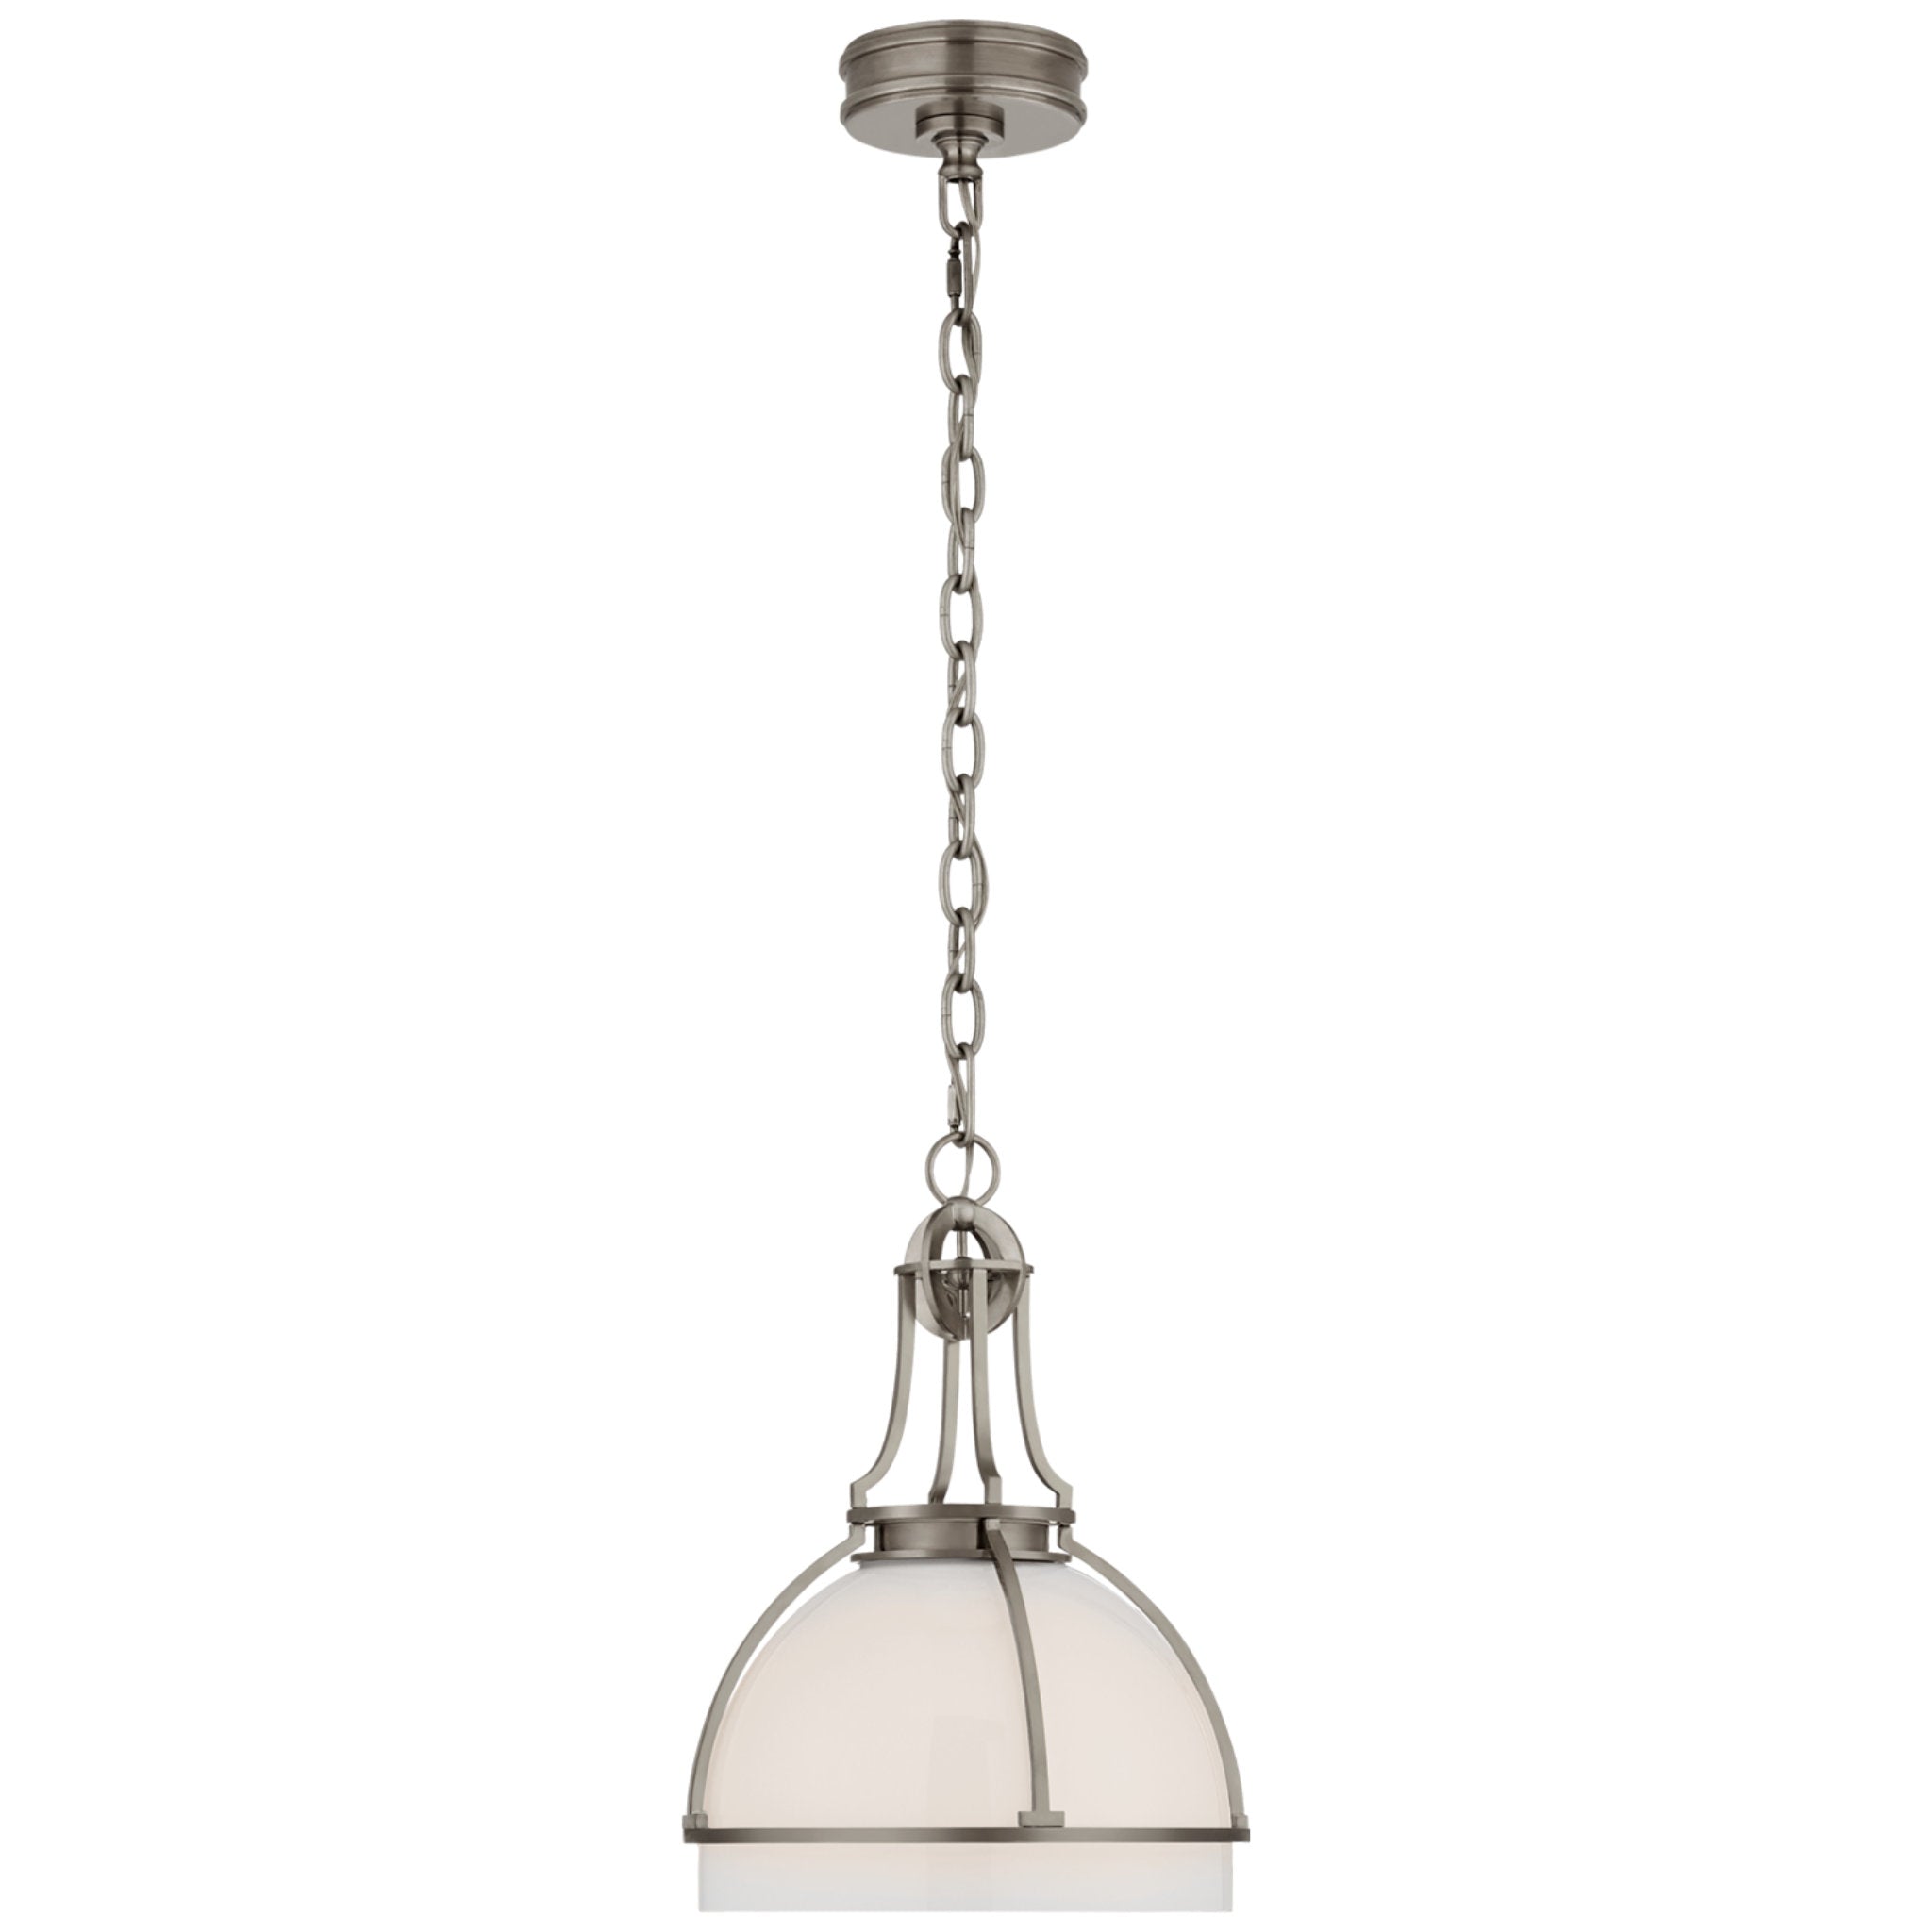 Chapman & Myers Gracie Medium Dome Pendant in Antique Nickel with White Glass